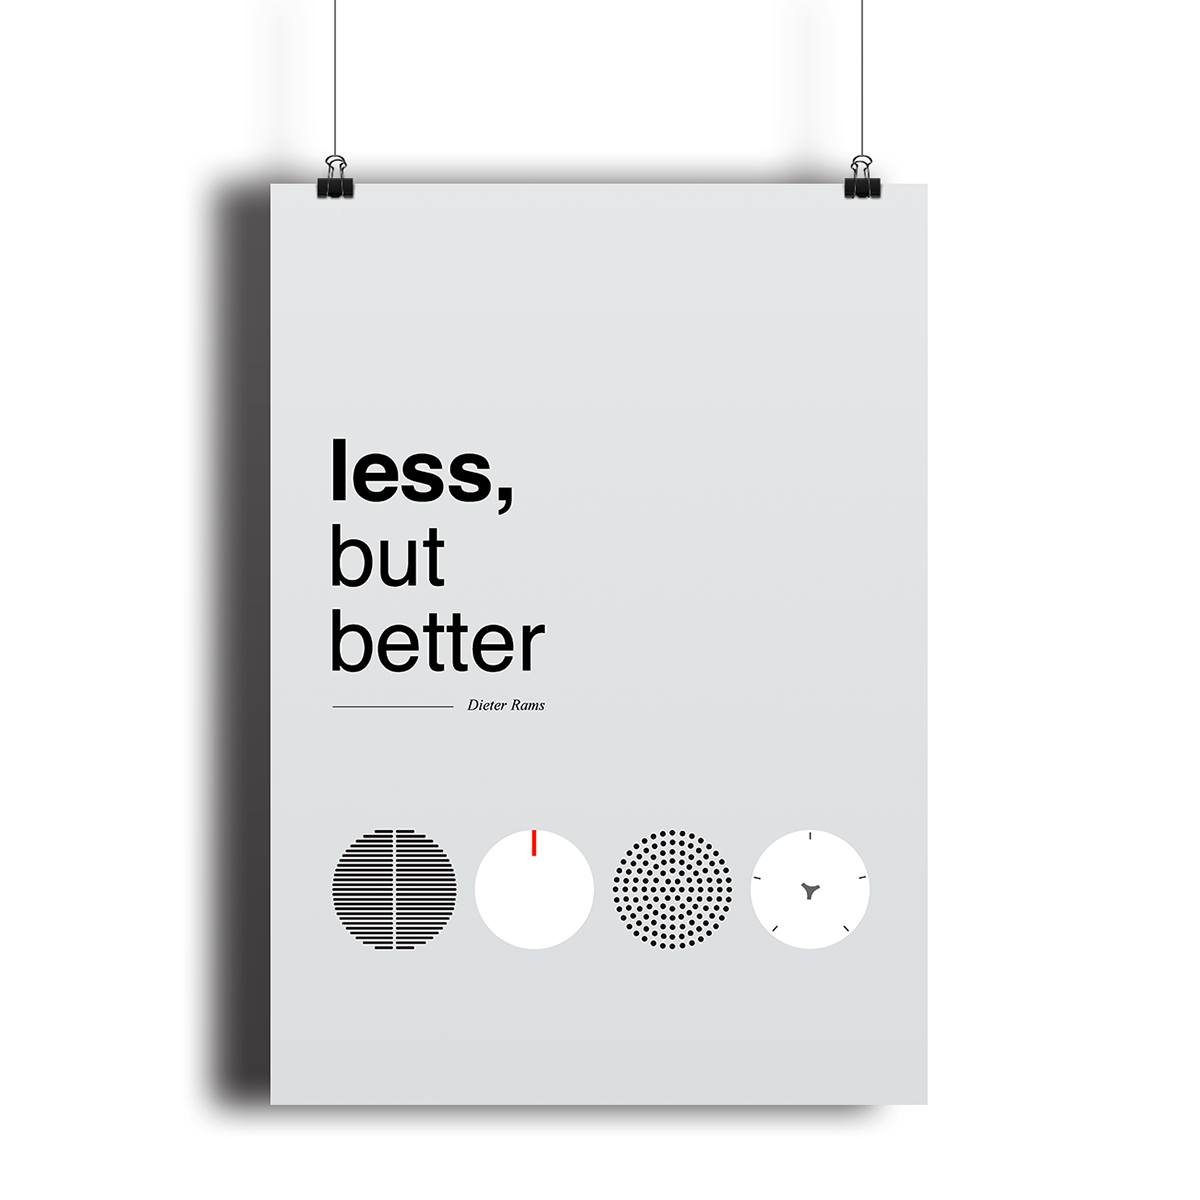 Great products do less, but better | by Fabricio Teixeira | UX Collective